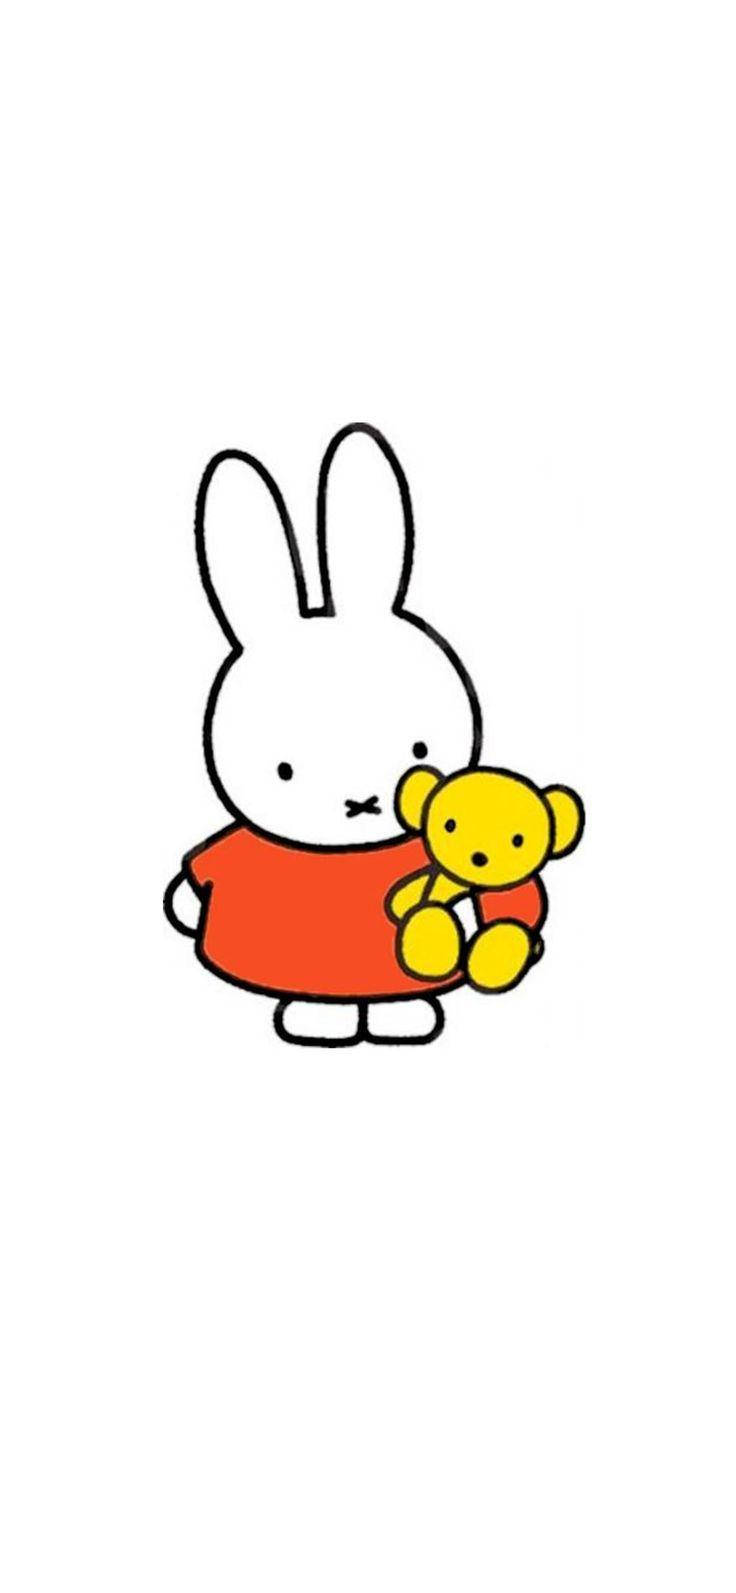 Miffy And Yellow Teddy Bear Background